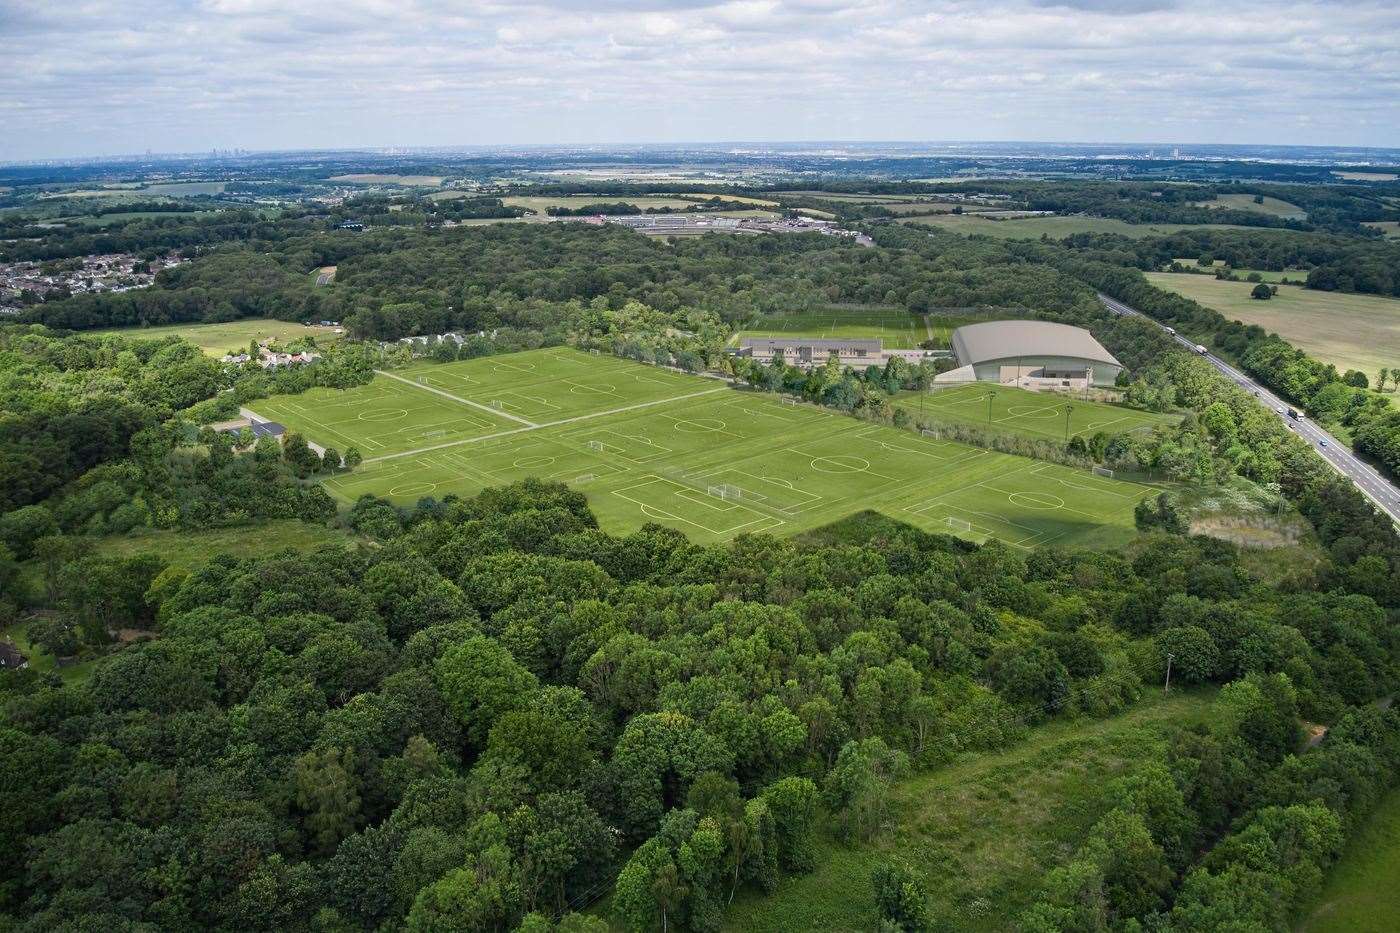 An aerial view of where the training ground and buildings will be built. Photo: Millwall FC